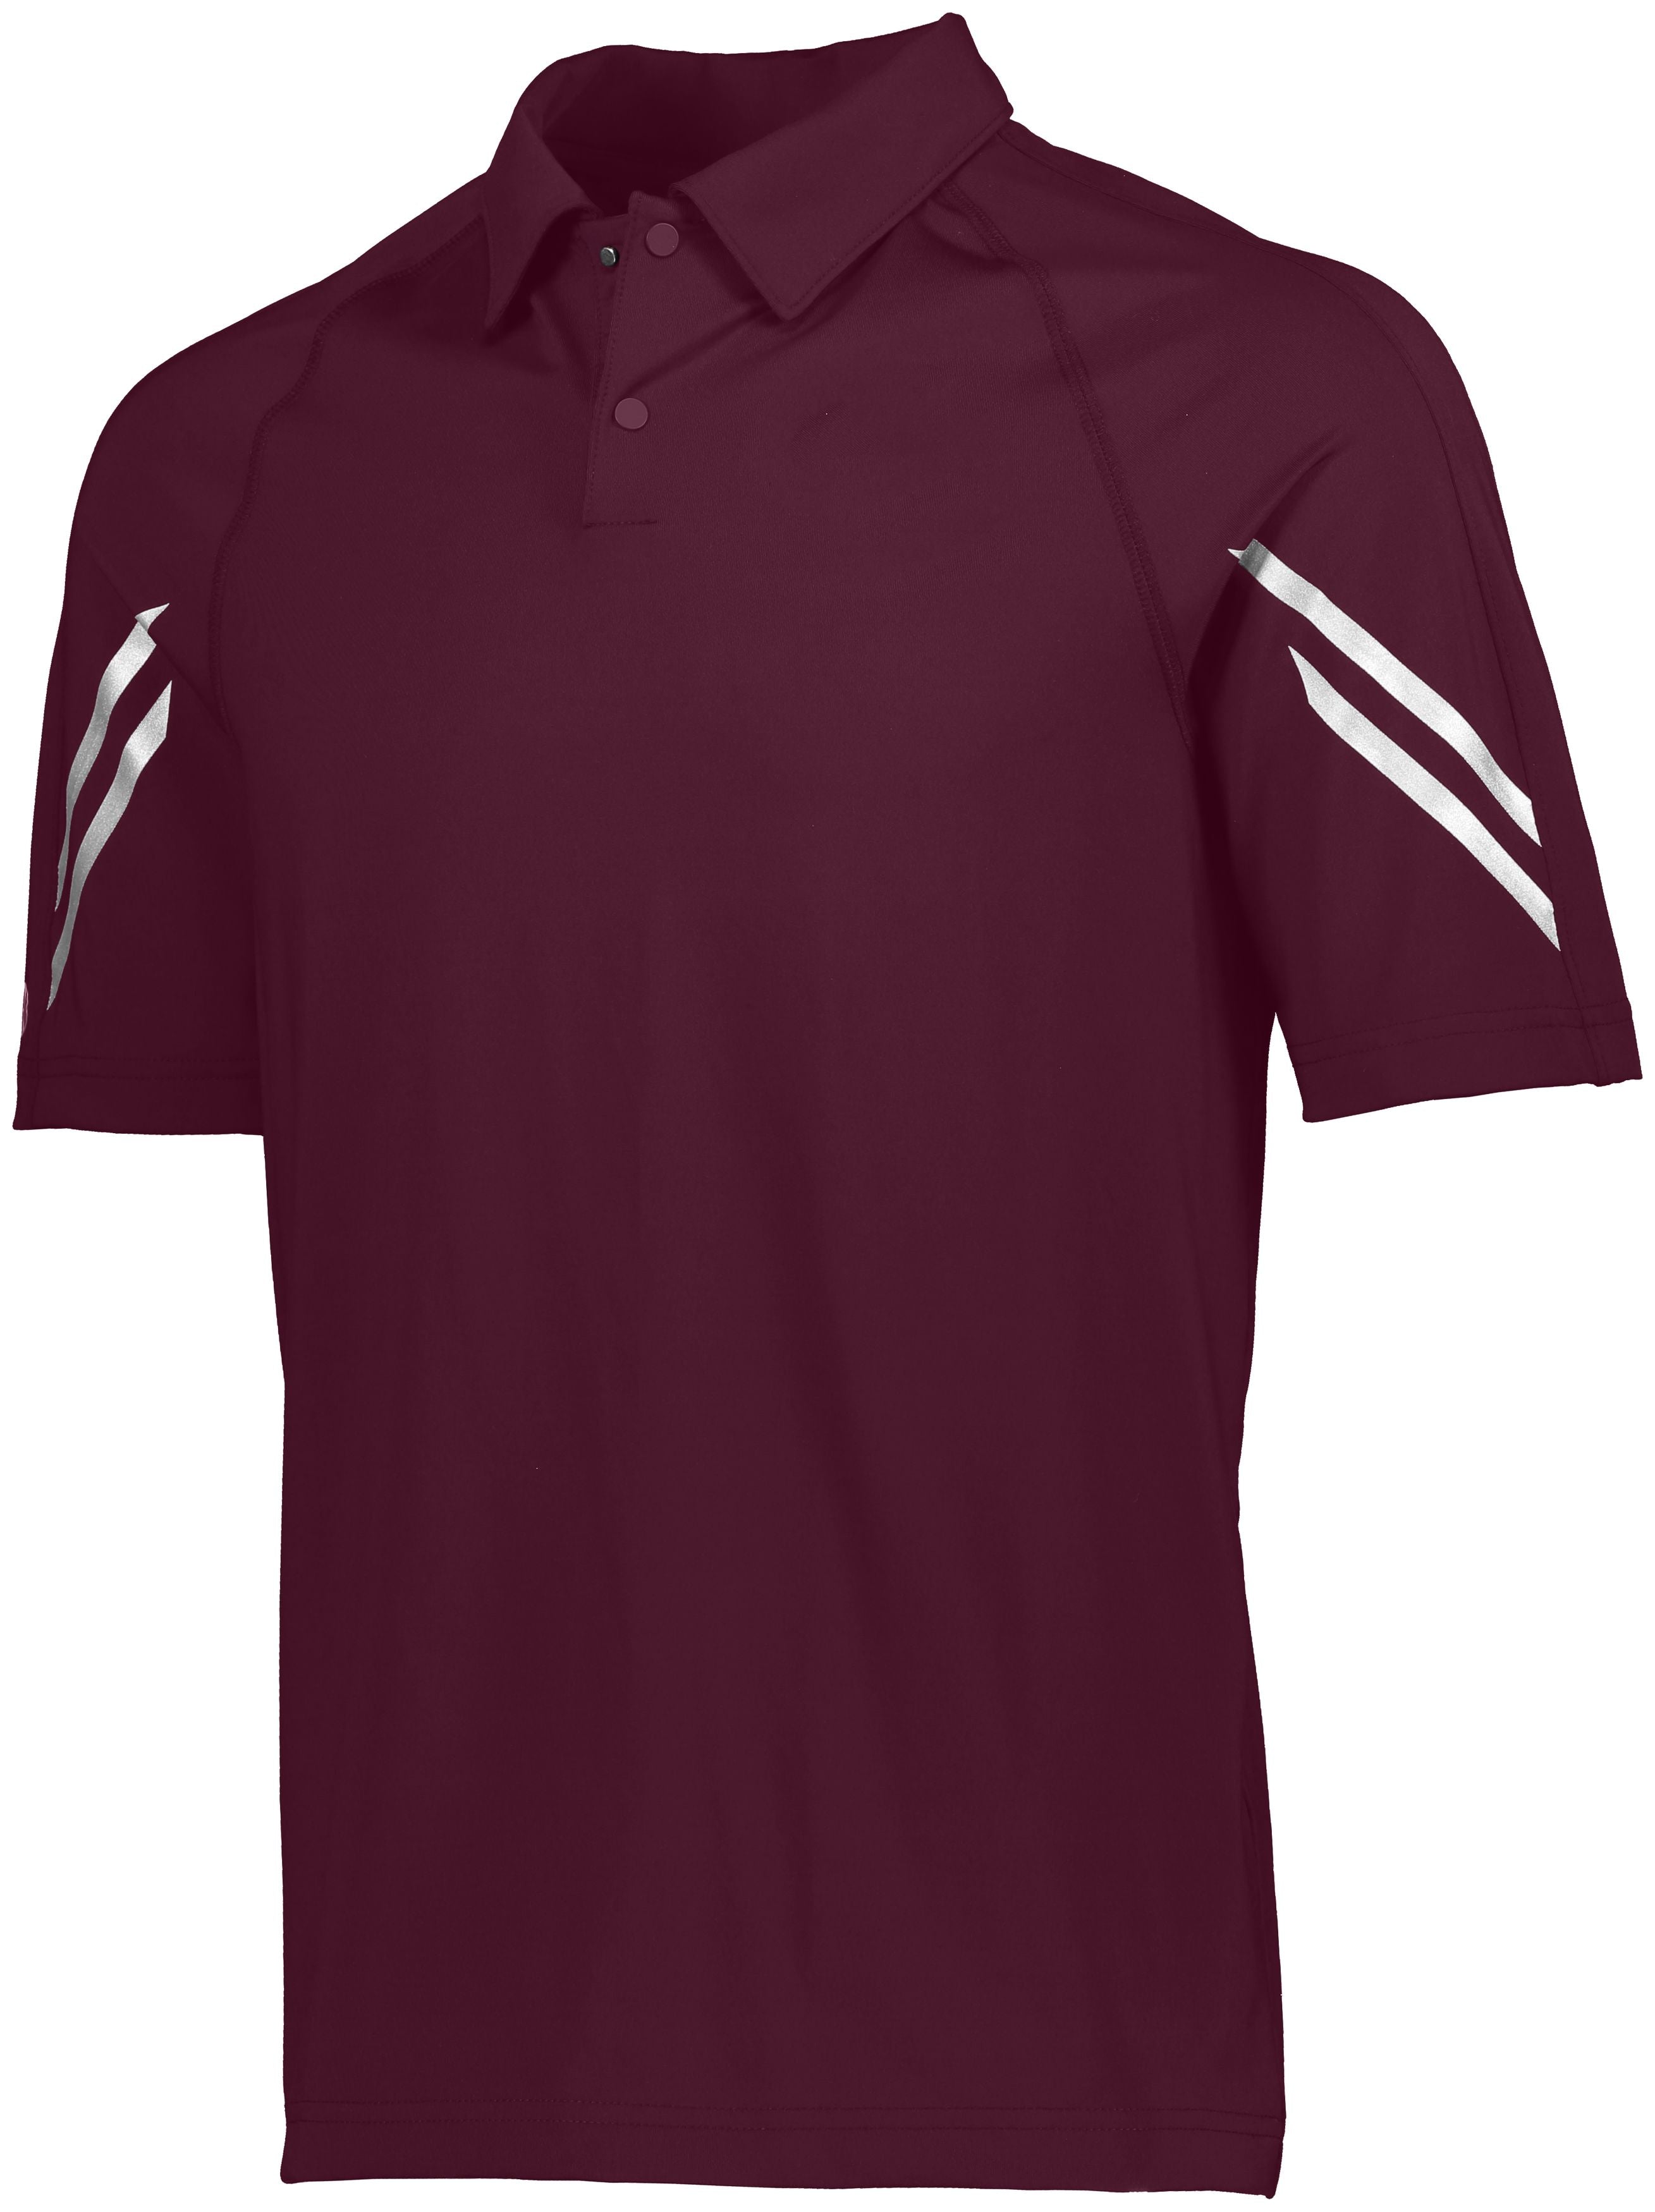 Holloway Flux Polo in Maroon  -Part of the Adult, Adult-Polos, Polos, Holloway, Shirts, Flux-Collection, Corporate-Collection product lines at KanaleyCreations.com